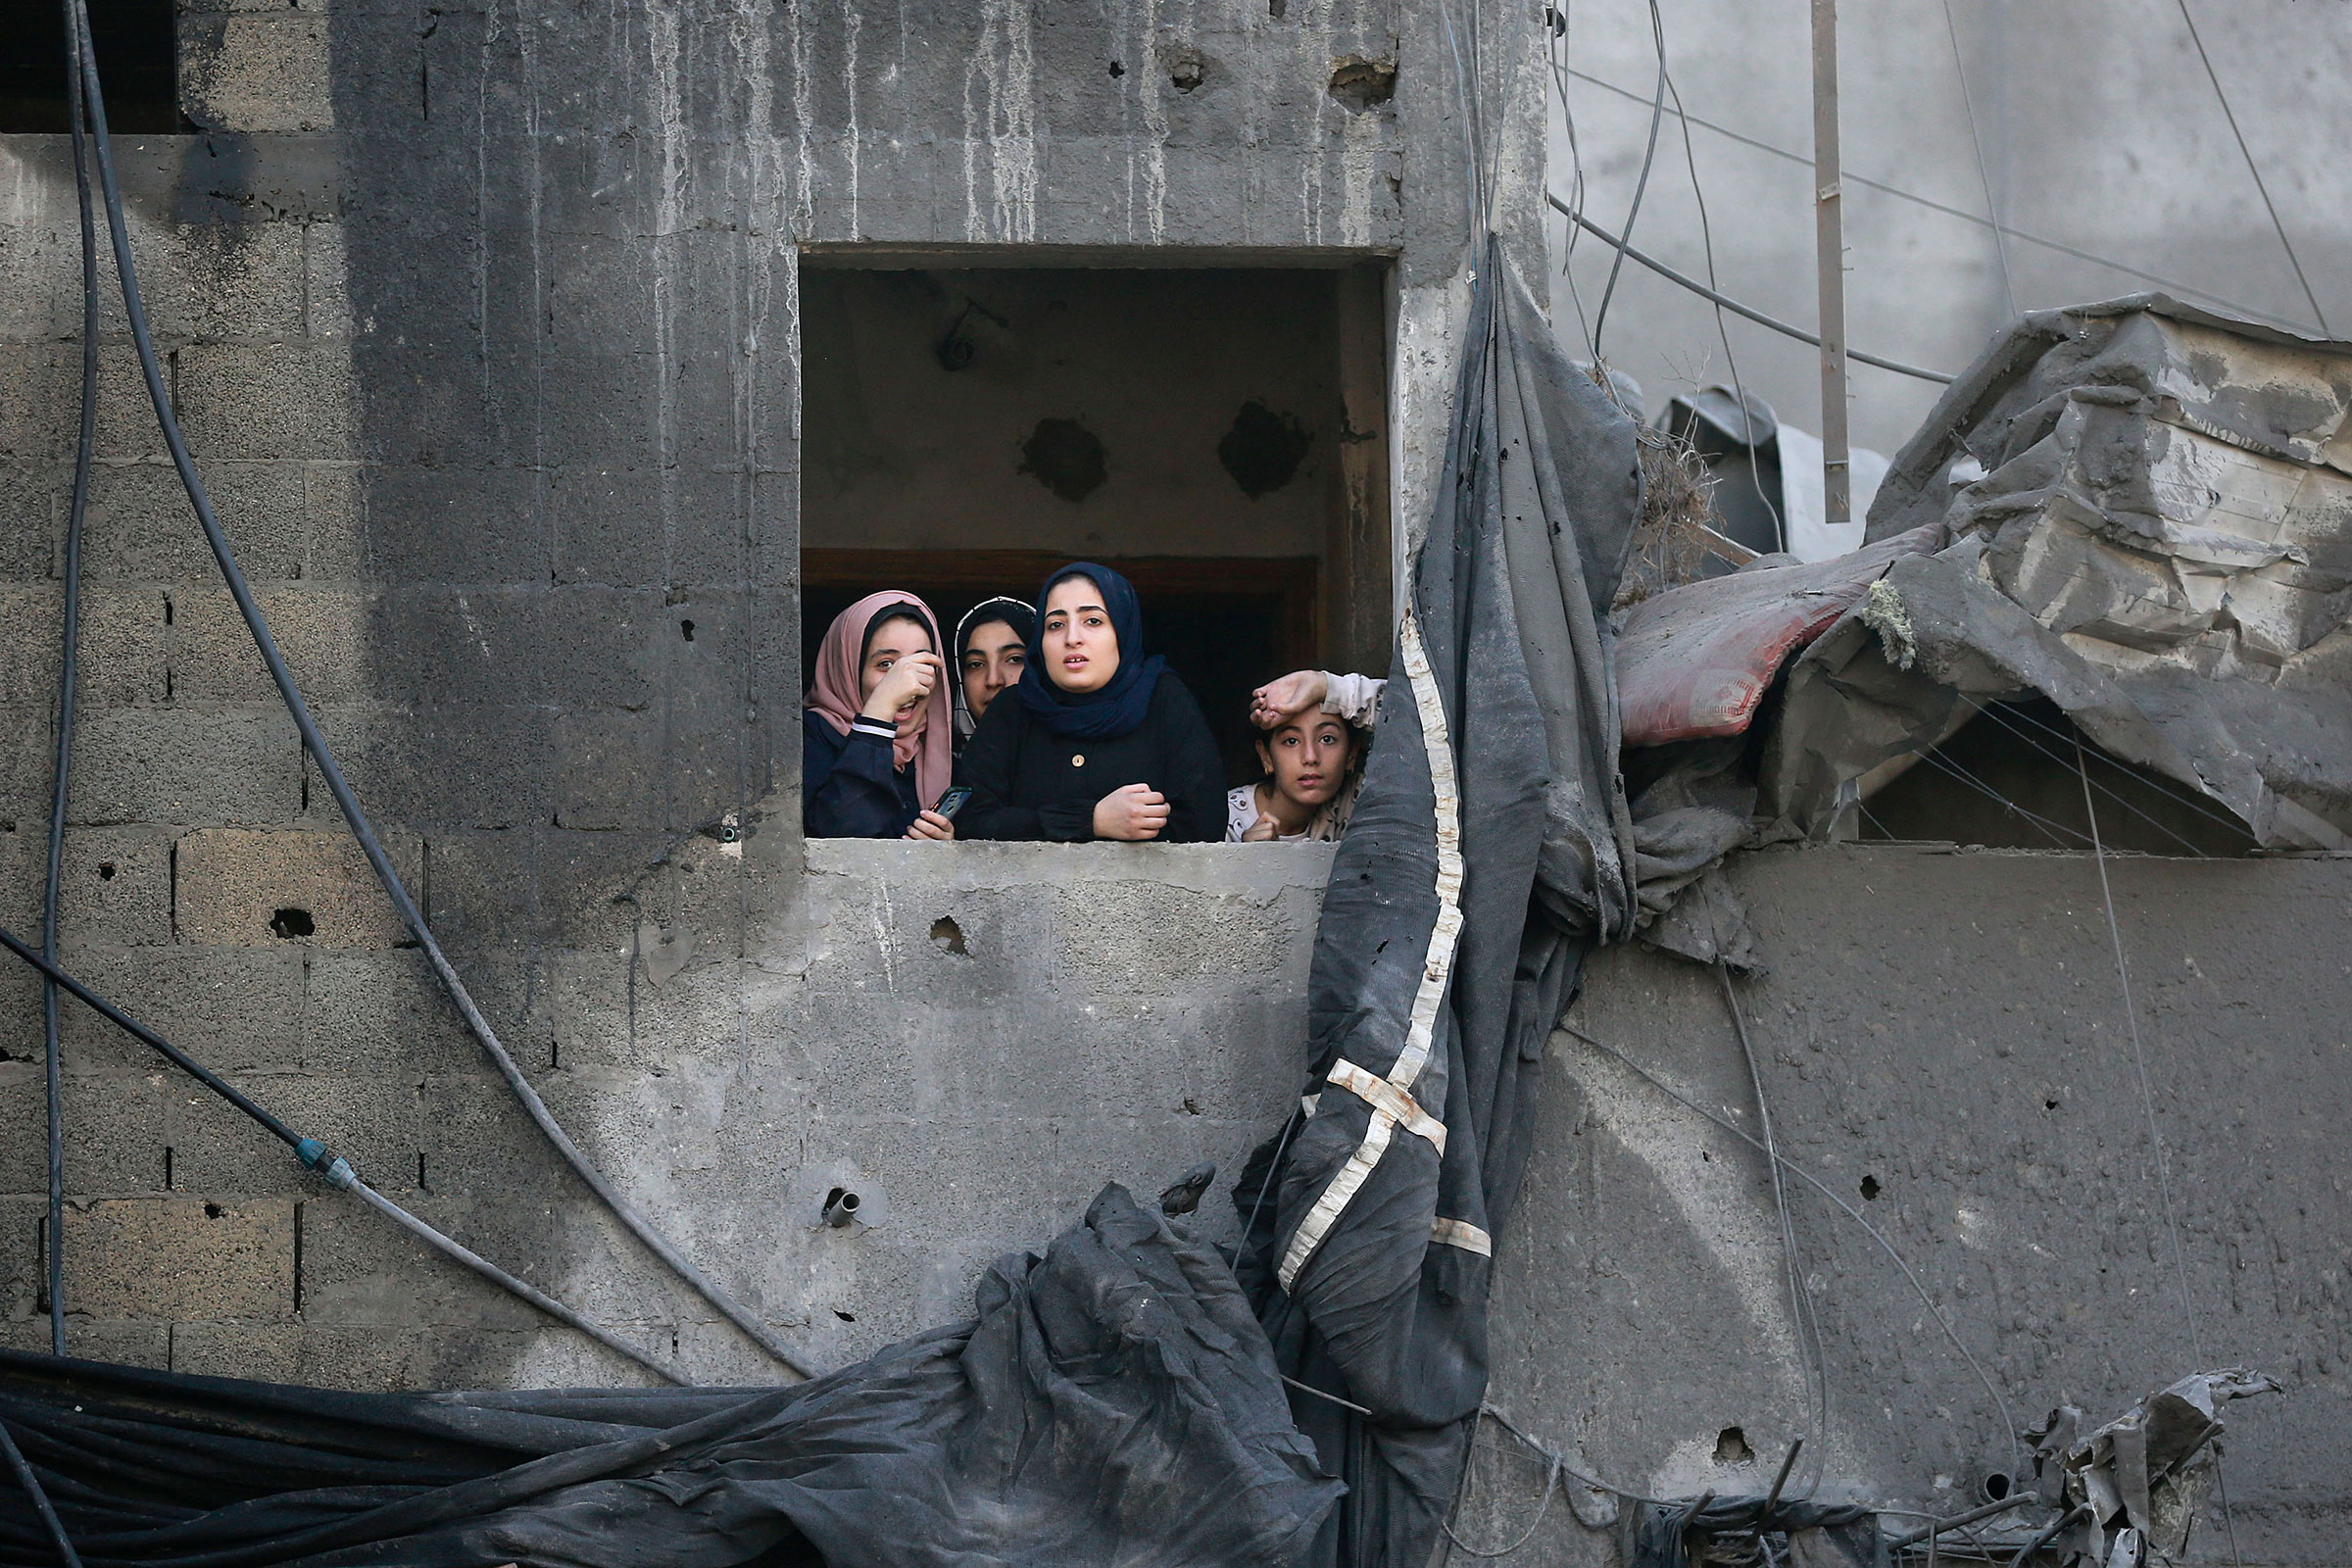 Palestinians check the destruction a day after an Israeli strike in the Jabalya camp for Palestinian refugees in the Gaza Strip, on November 1.